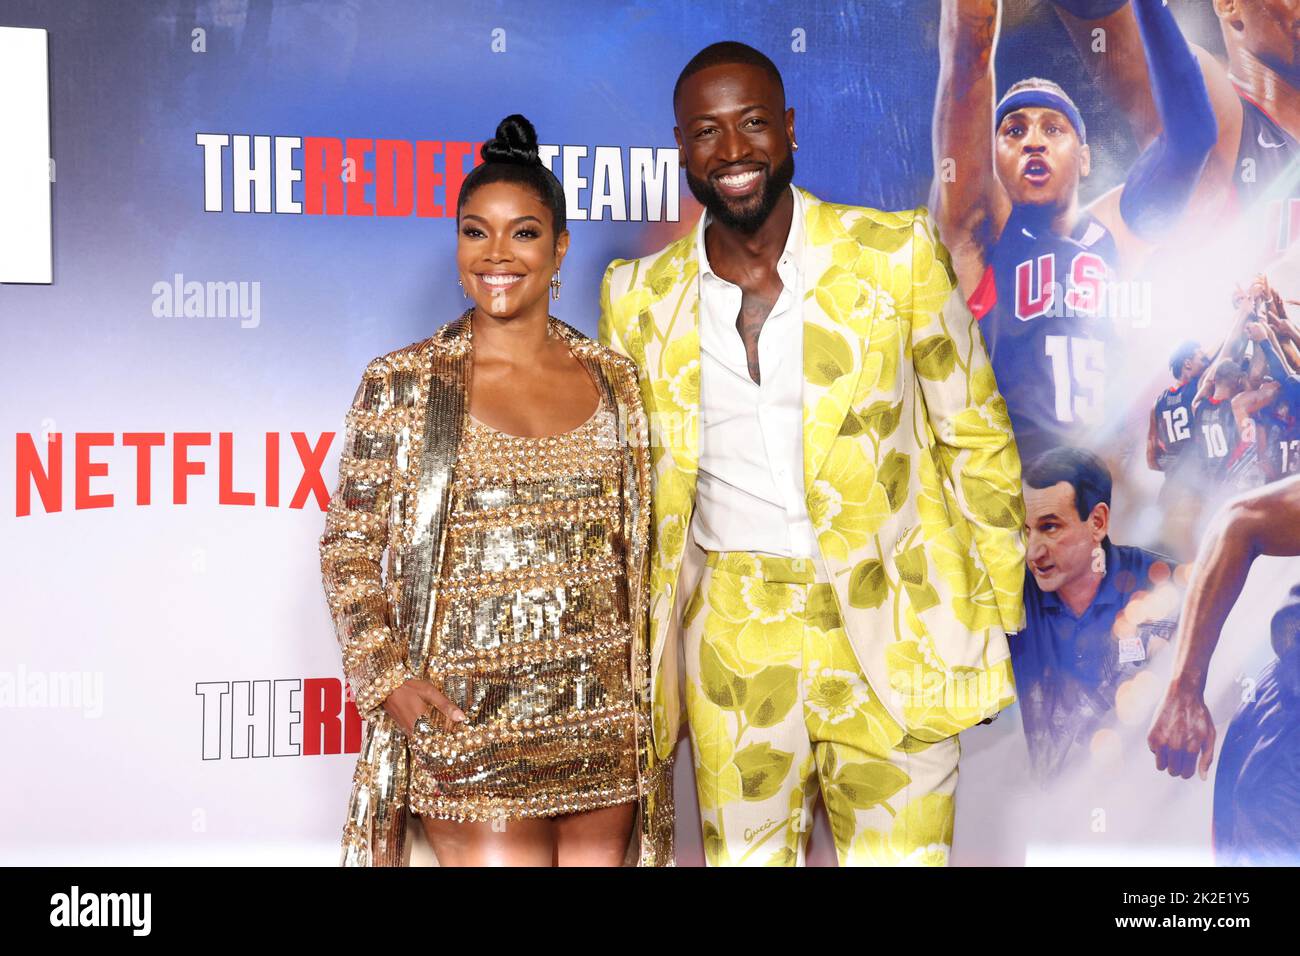 Dwyane Wade and Gabrielle Union attend a screening for the documentary 'The Redeem Team' in Los Angeles, California, U.S. September 22, 2022.  REUTERS/Mario Anzuoni Stock Photo